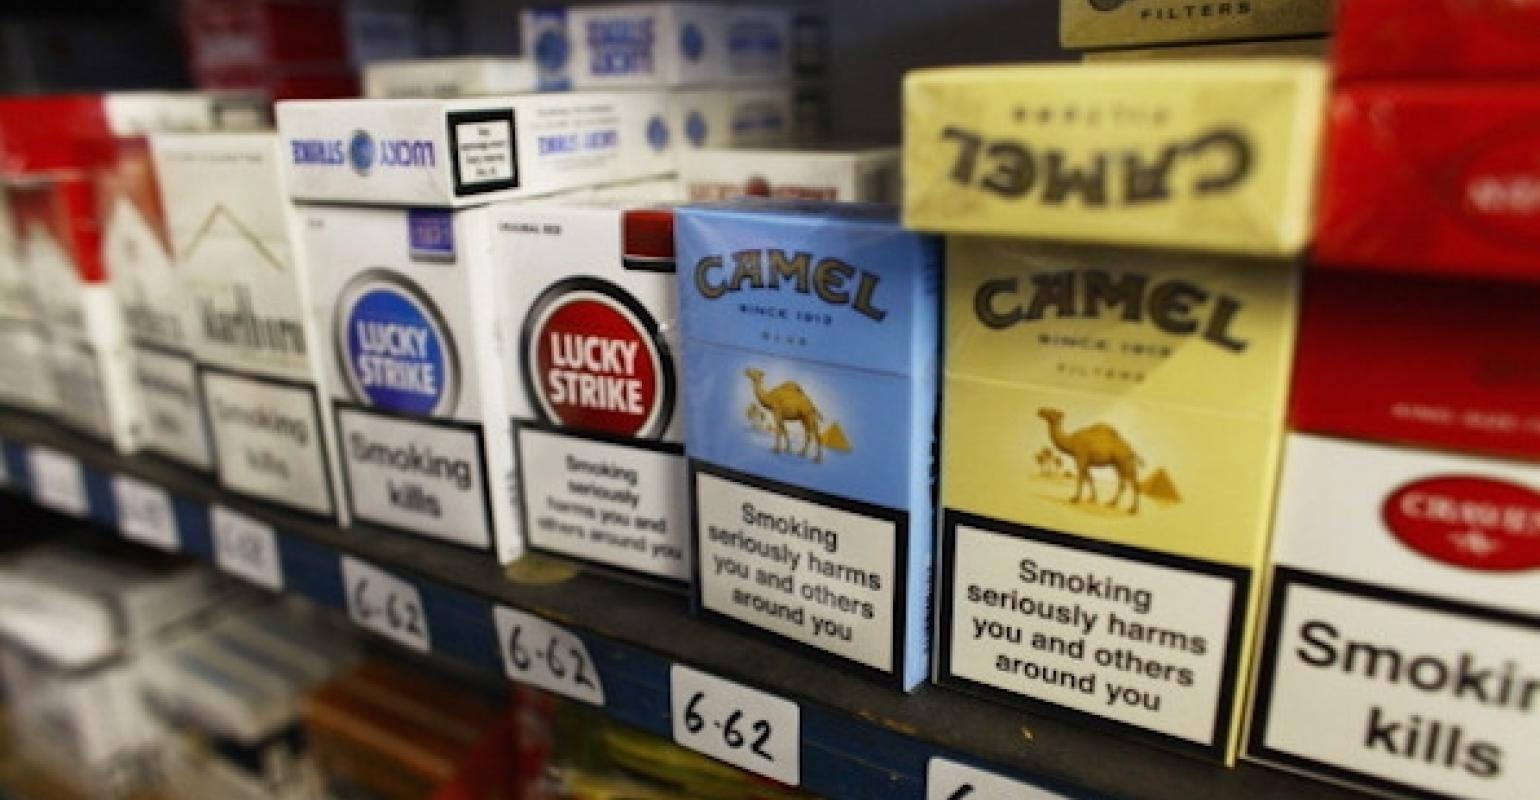 Cancer patient “to sue” tobacco firm